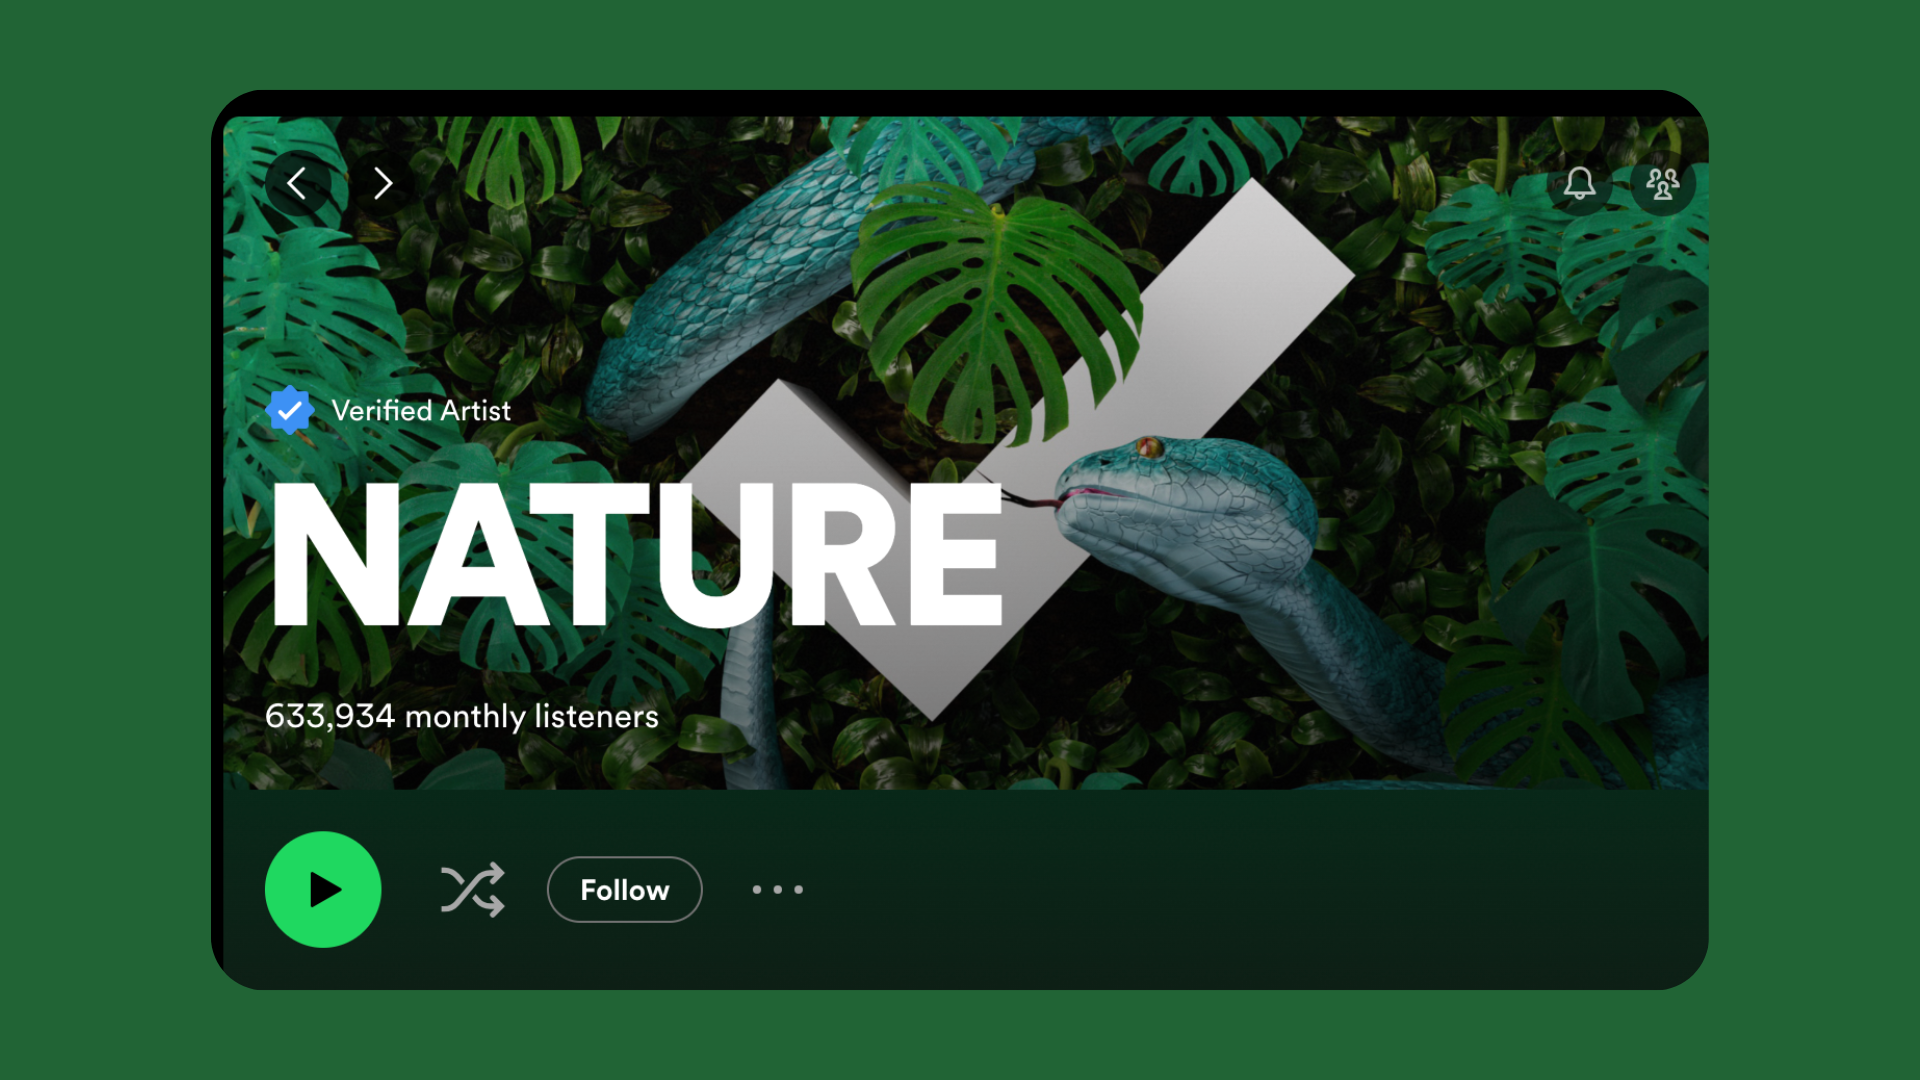 A screenshot of Spotify's Nature artist page.